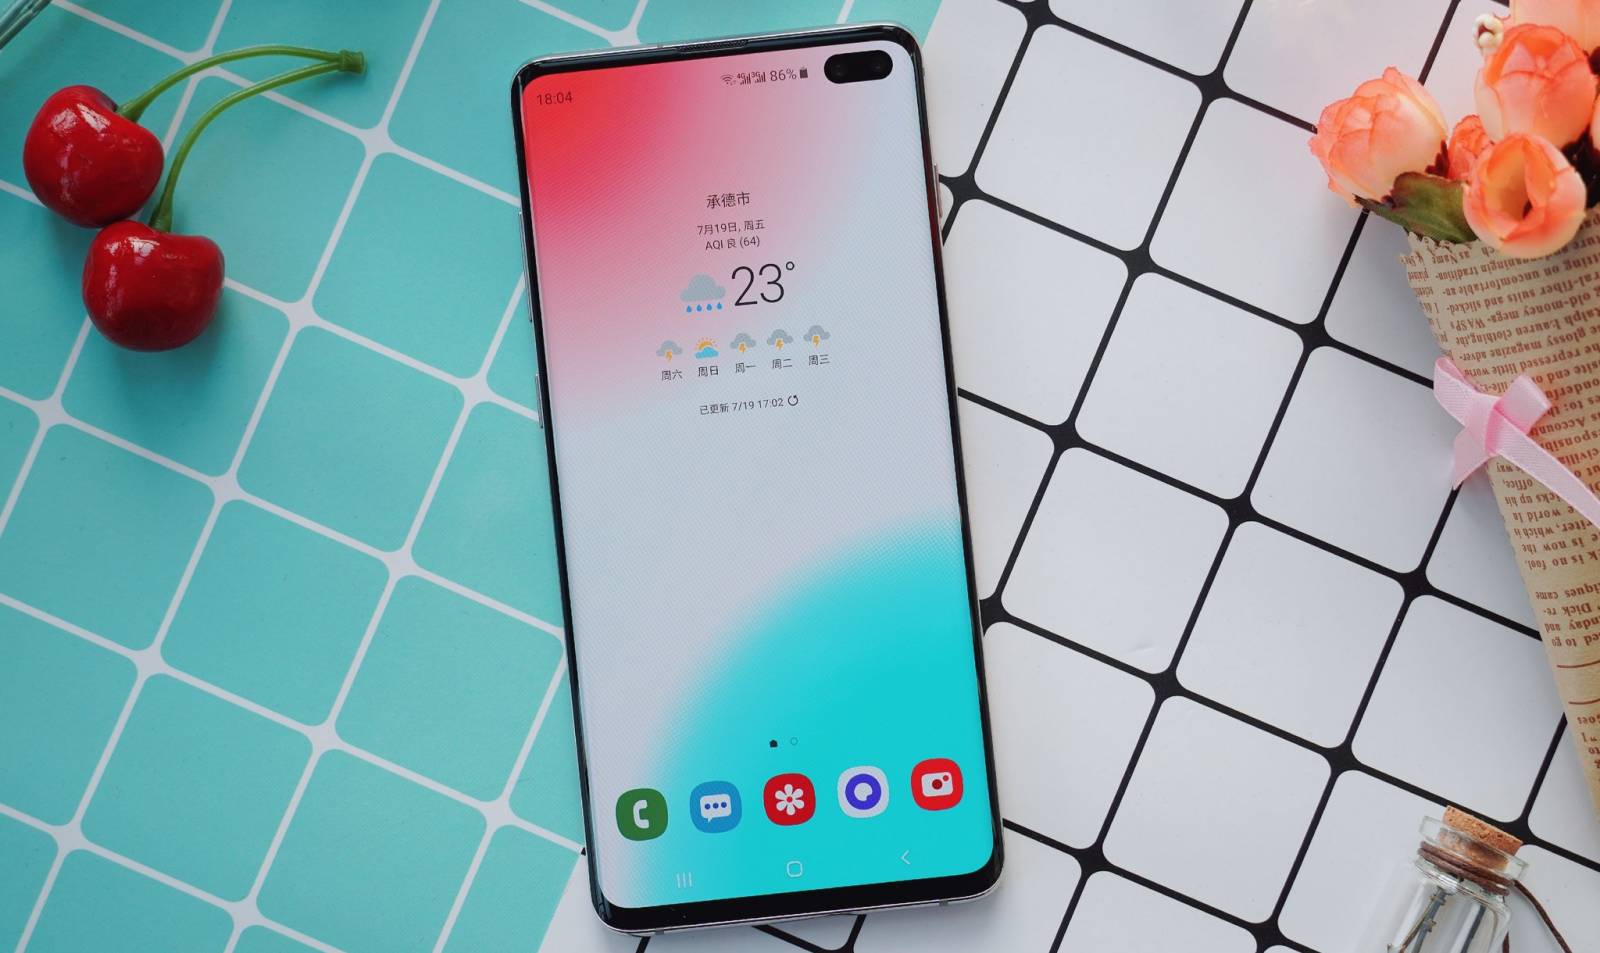 Samsung GALAXY S11. It is under development, here are the MAJOR NEWS